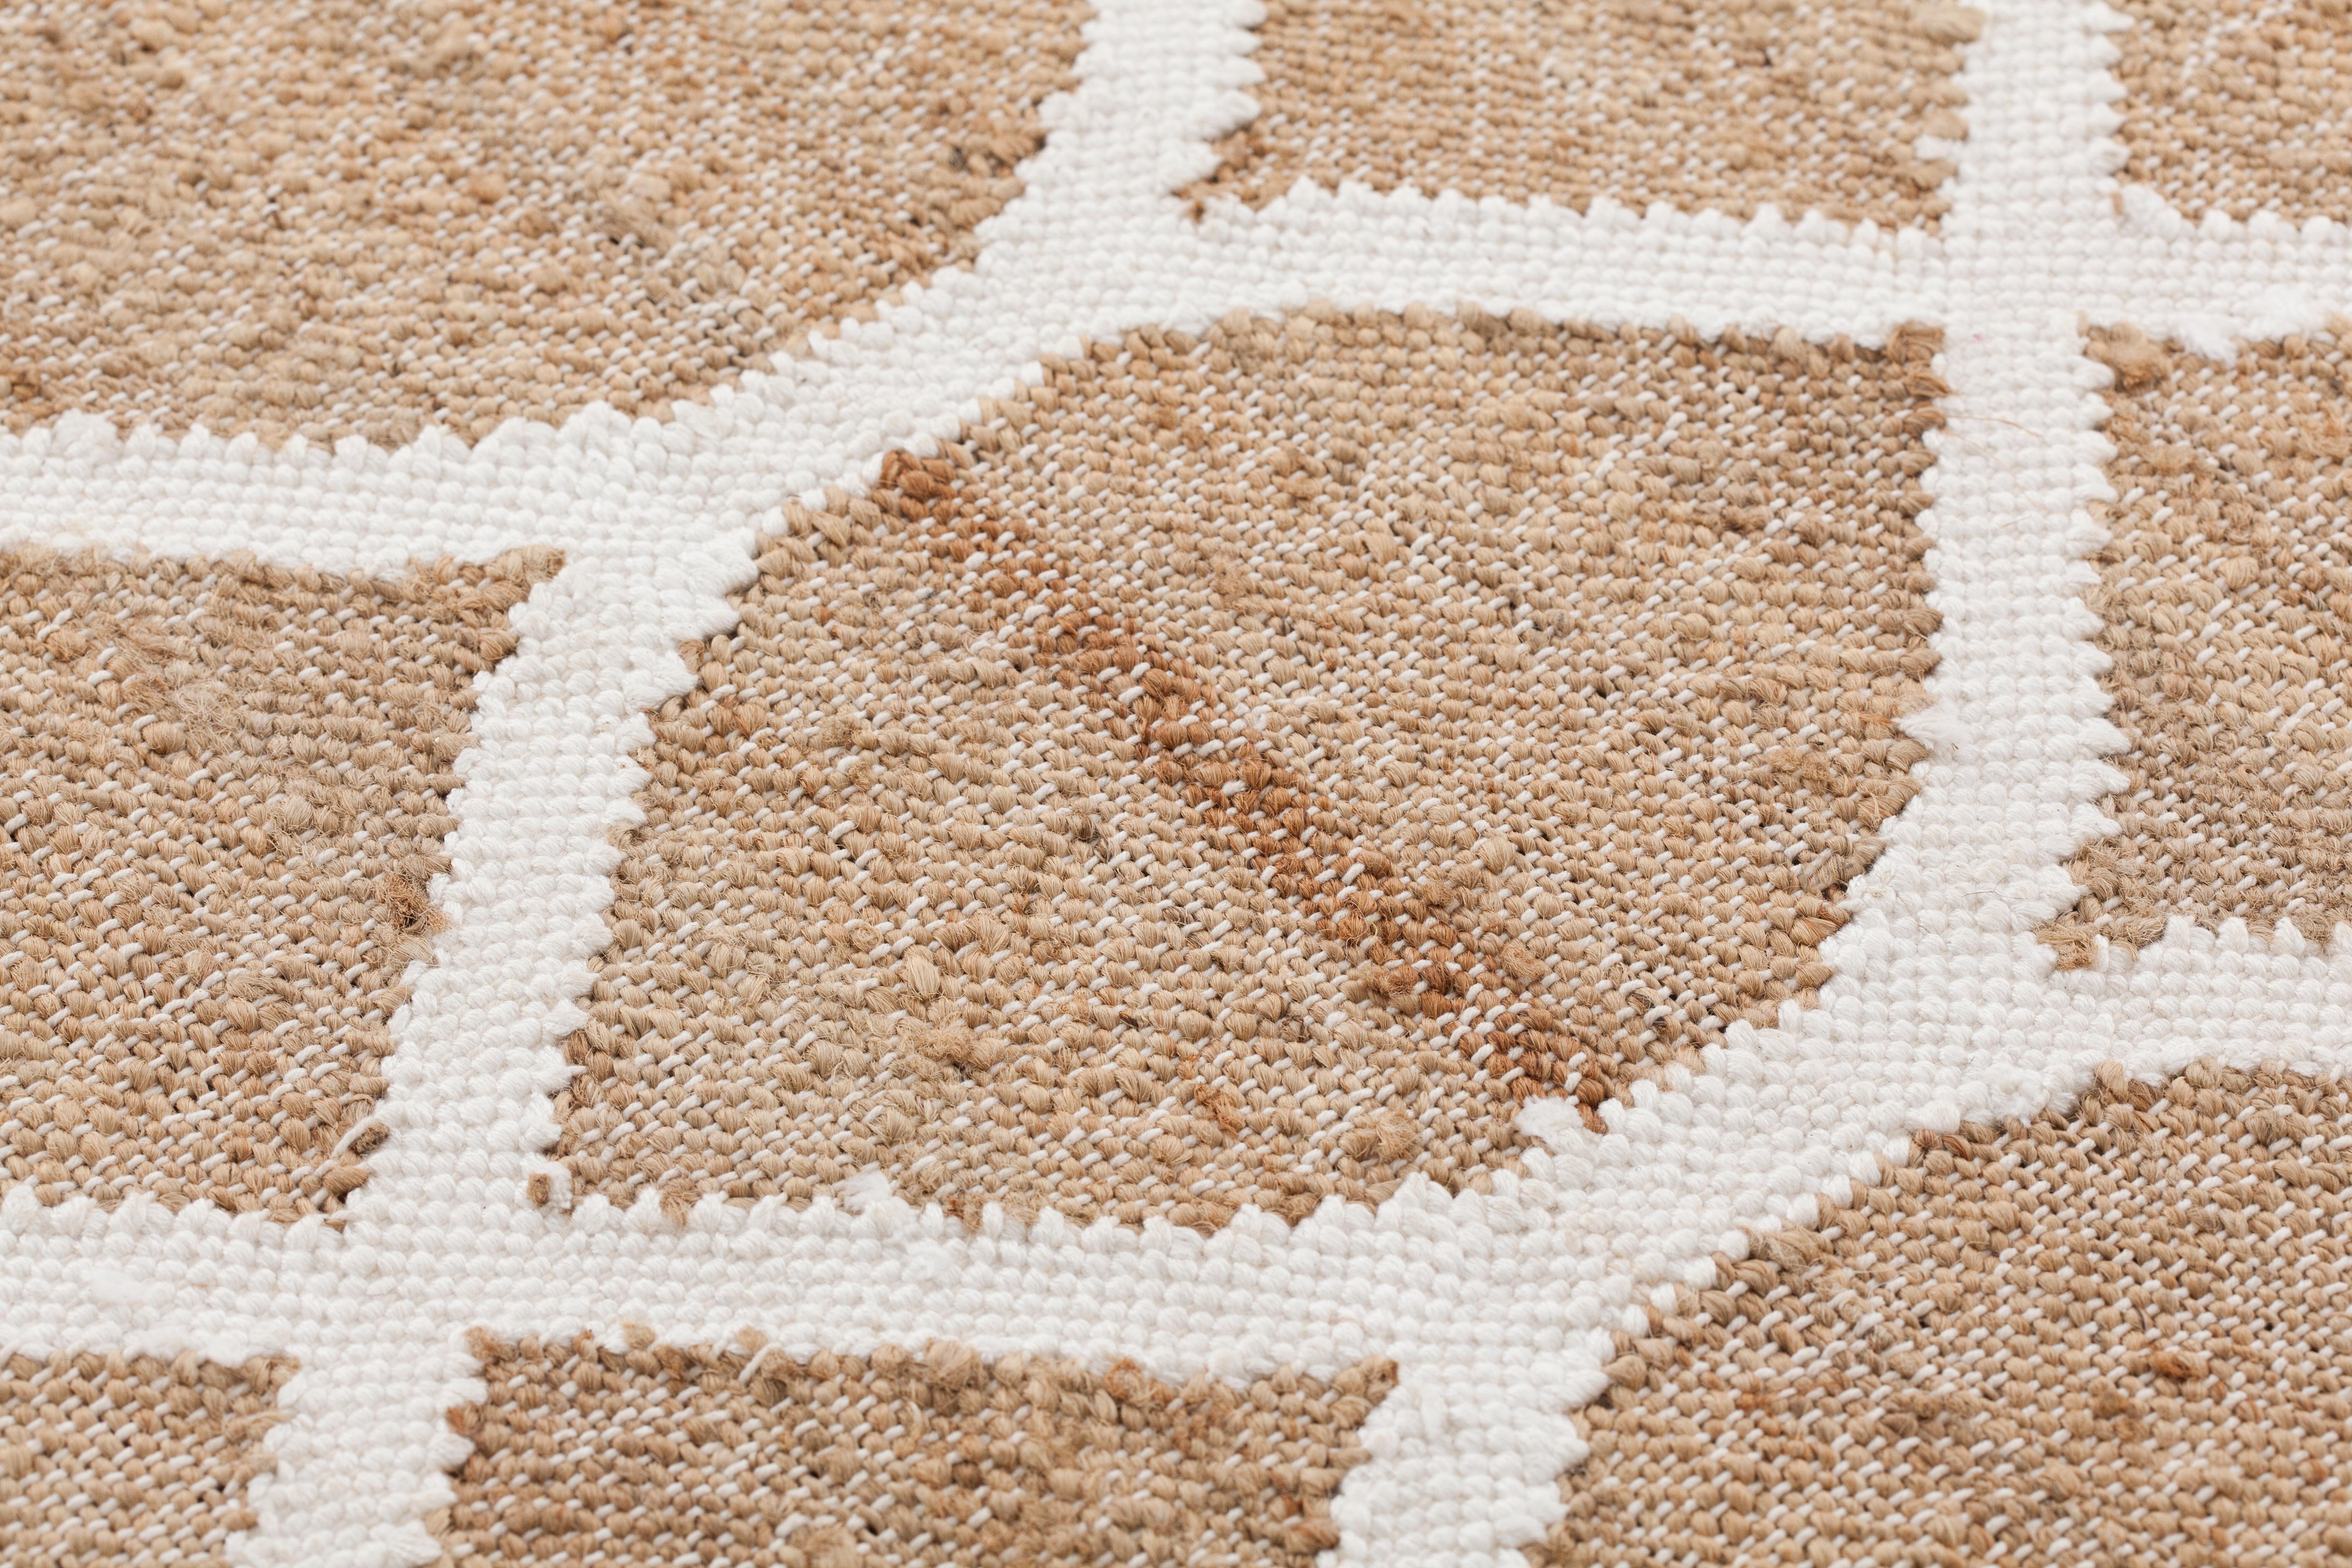 A rug that is a hybrid carpet/tapestry RODAS forms part of the KILIM collection designed and manu- factured by GAN, GANDIABLASCO’s indoor brand, using the traditional weaving techniques.
RODAS is characterized by the strength of its fabric, jute,